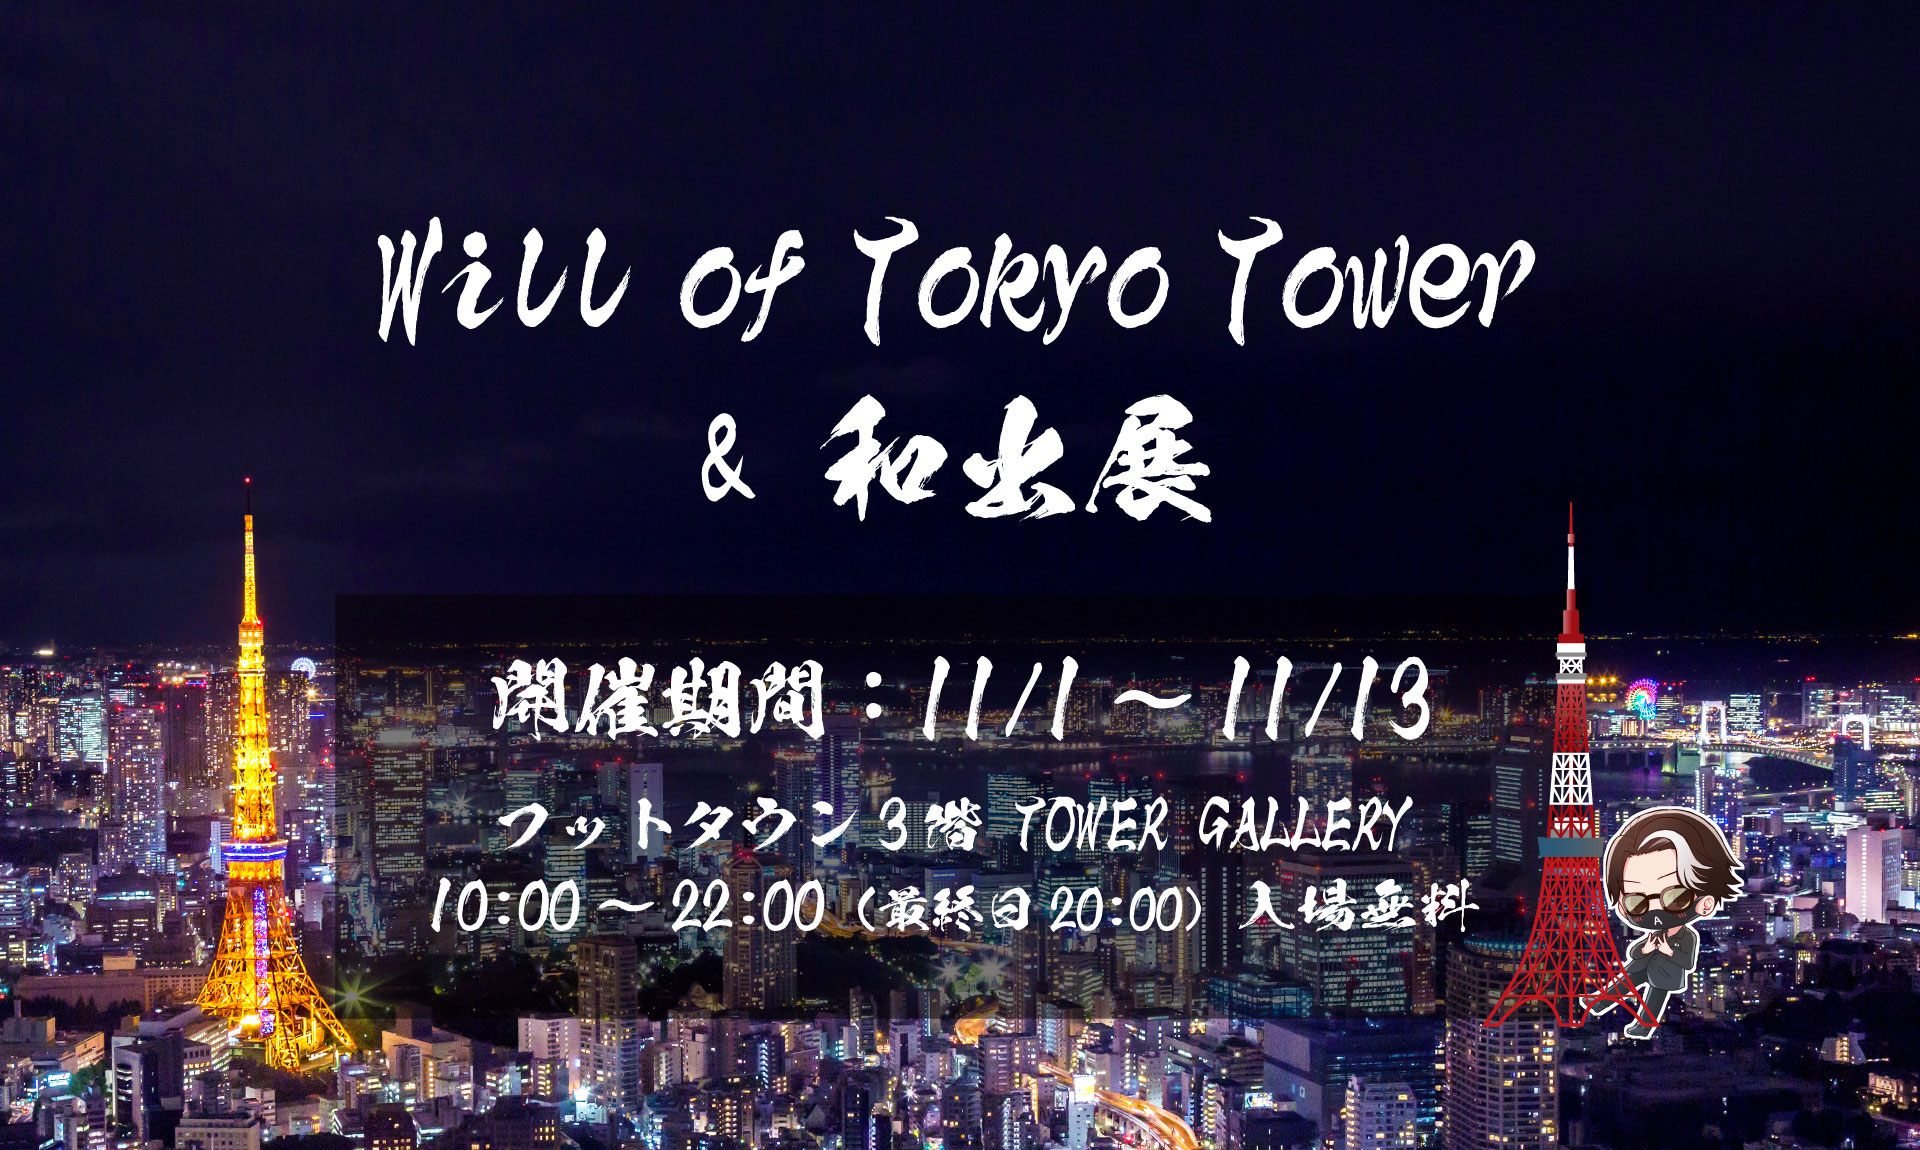 Will of Tokyo Tower ＆ 和出展